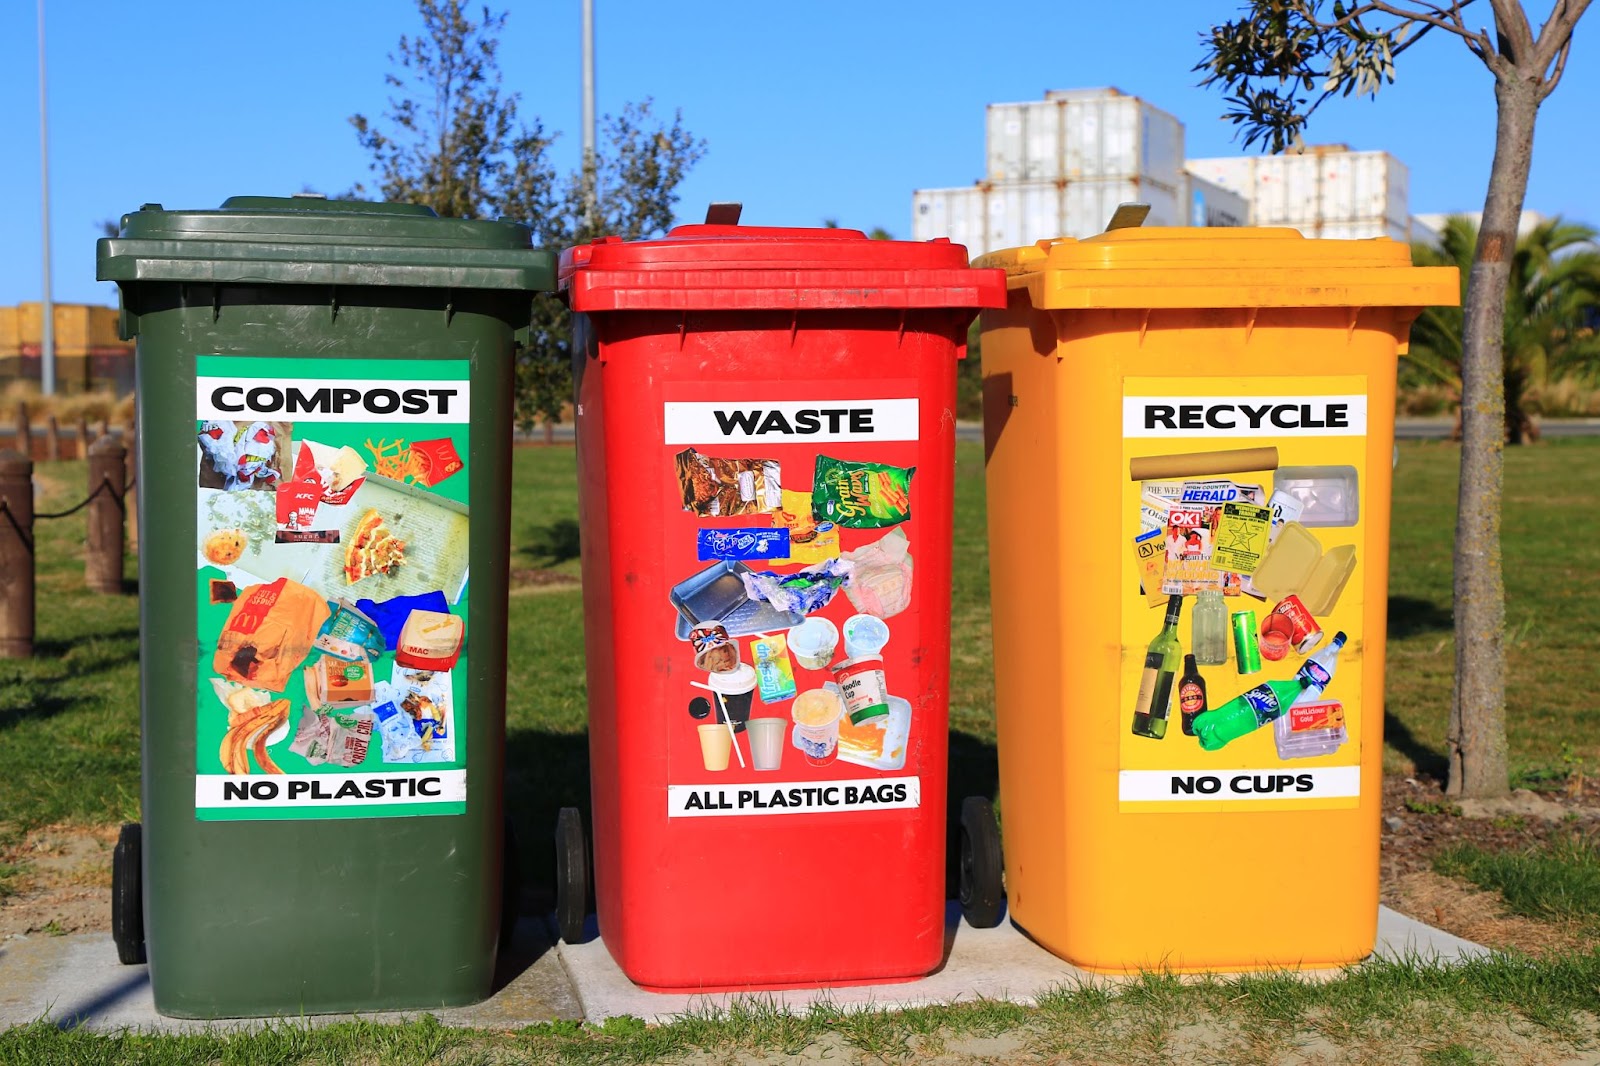 a green compost bin, a red waste bin, and a yellow recycle bin